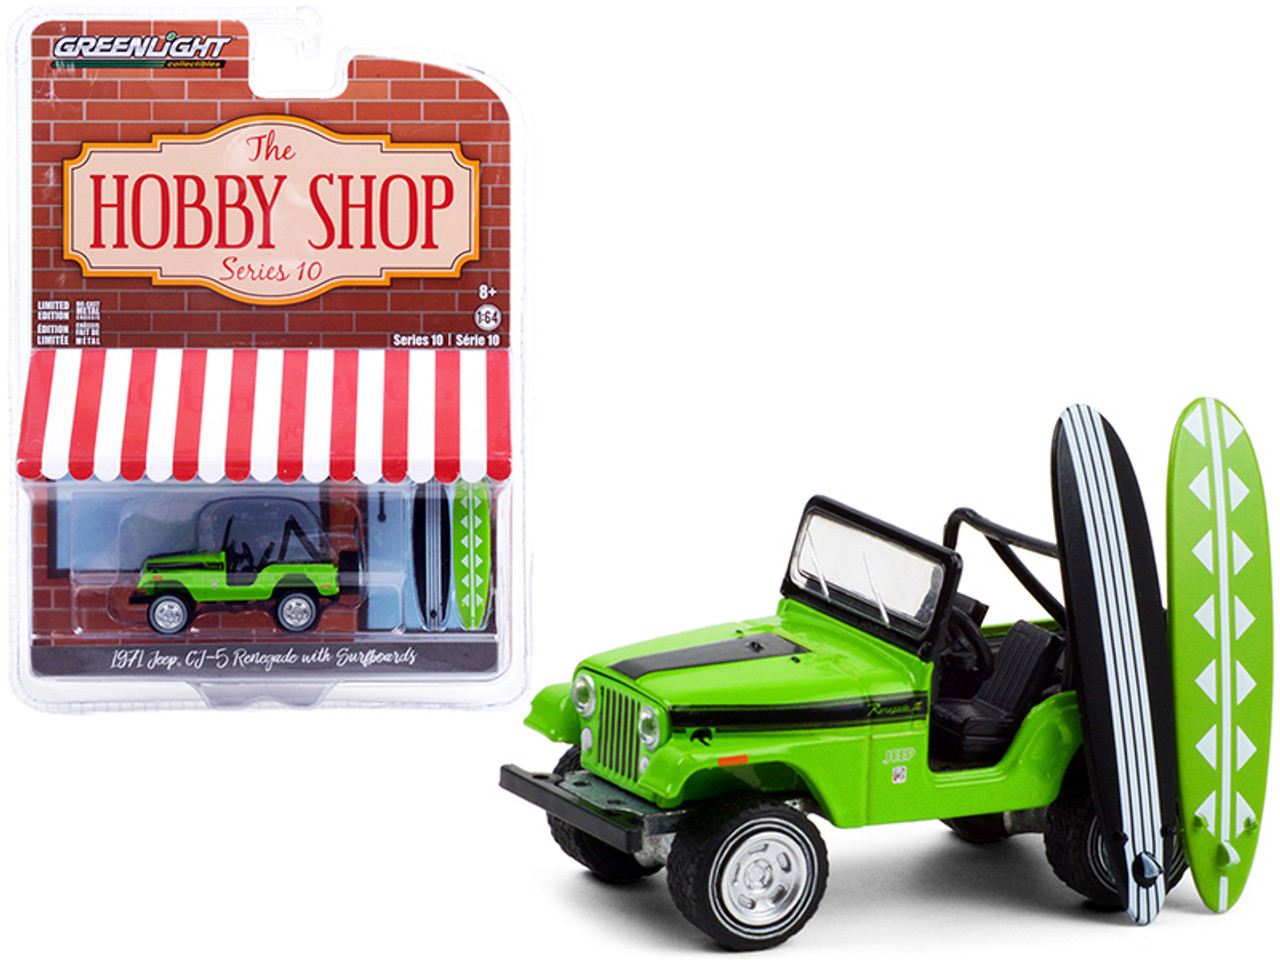 1971 Jeep CJ-5 Renegade Big Bad Green with Black Stripes with Two Surfboards "The Hobby Shop" Series 10 1/64 Diecast Model Car by Greenlight